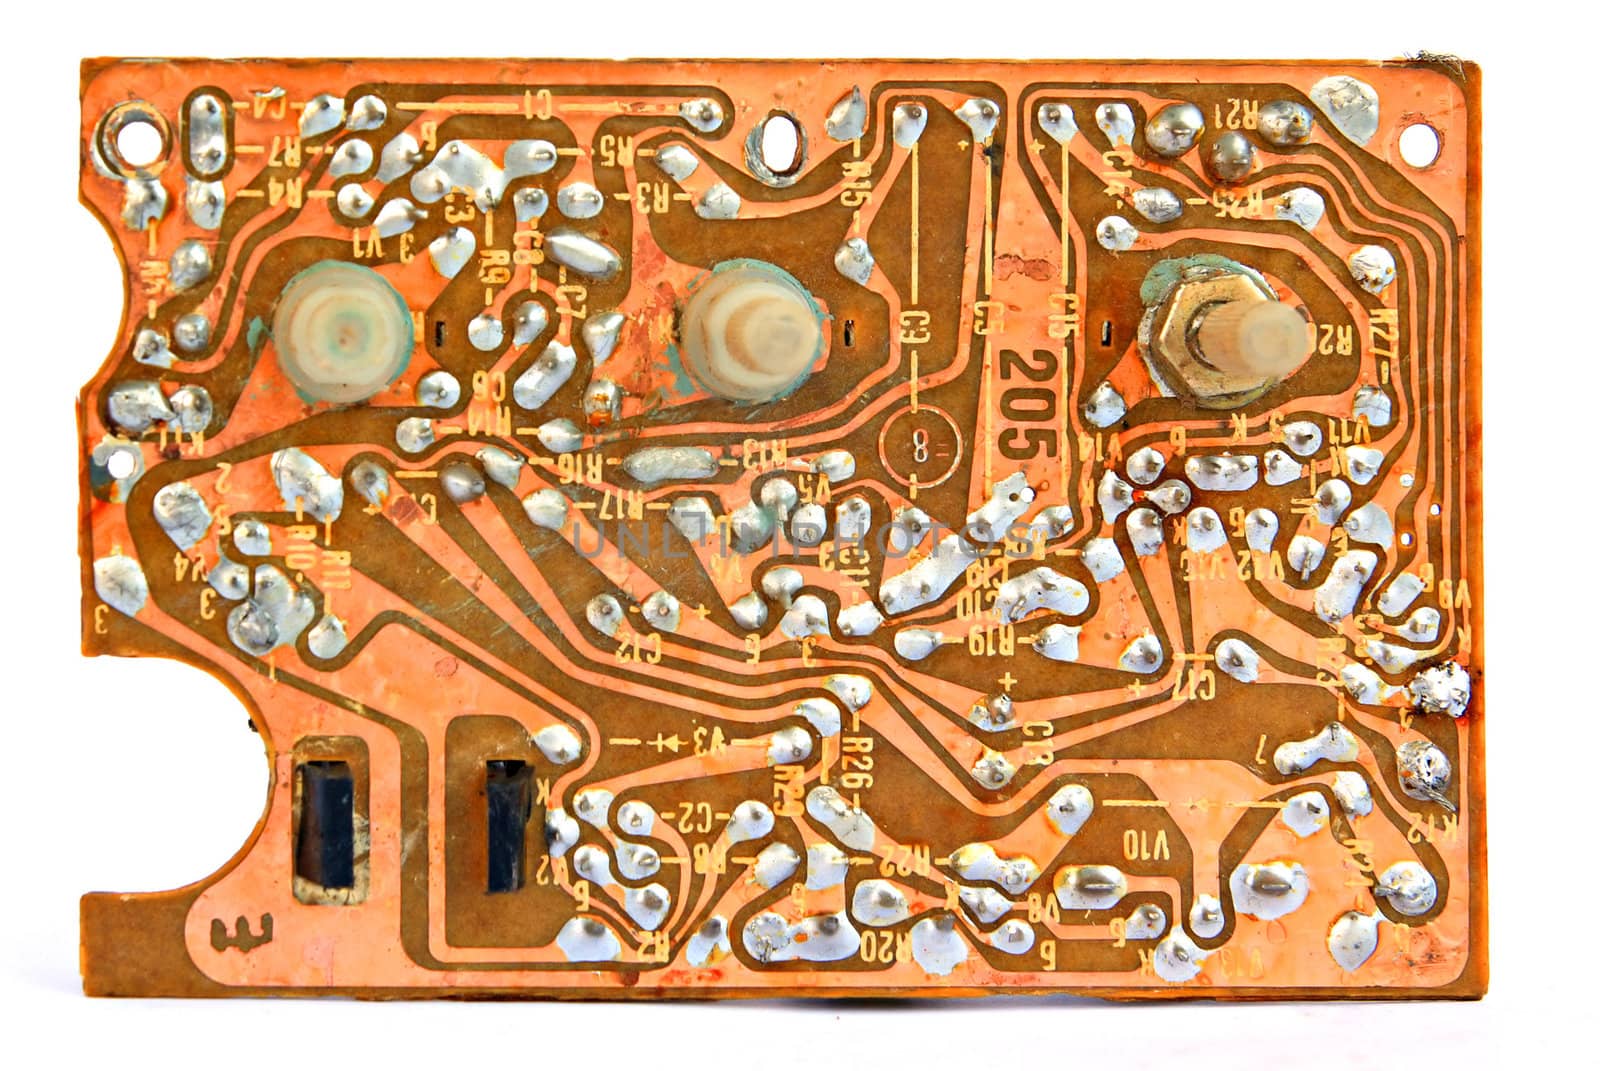 aging circuitry by basel101658